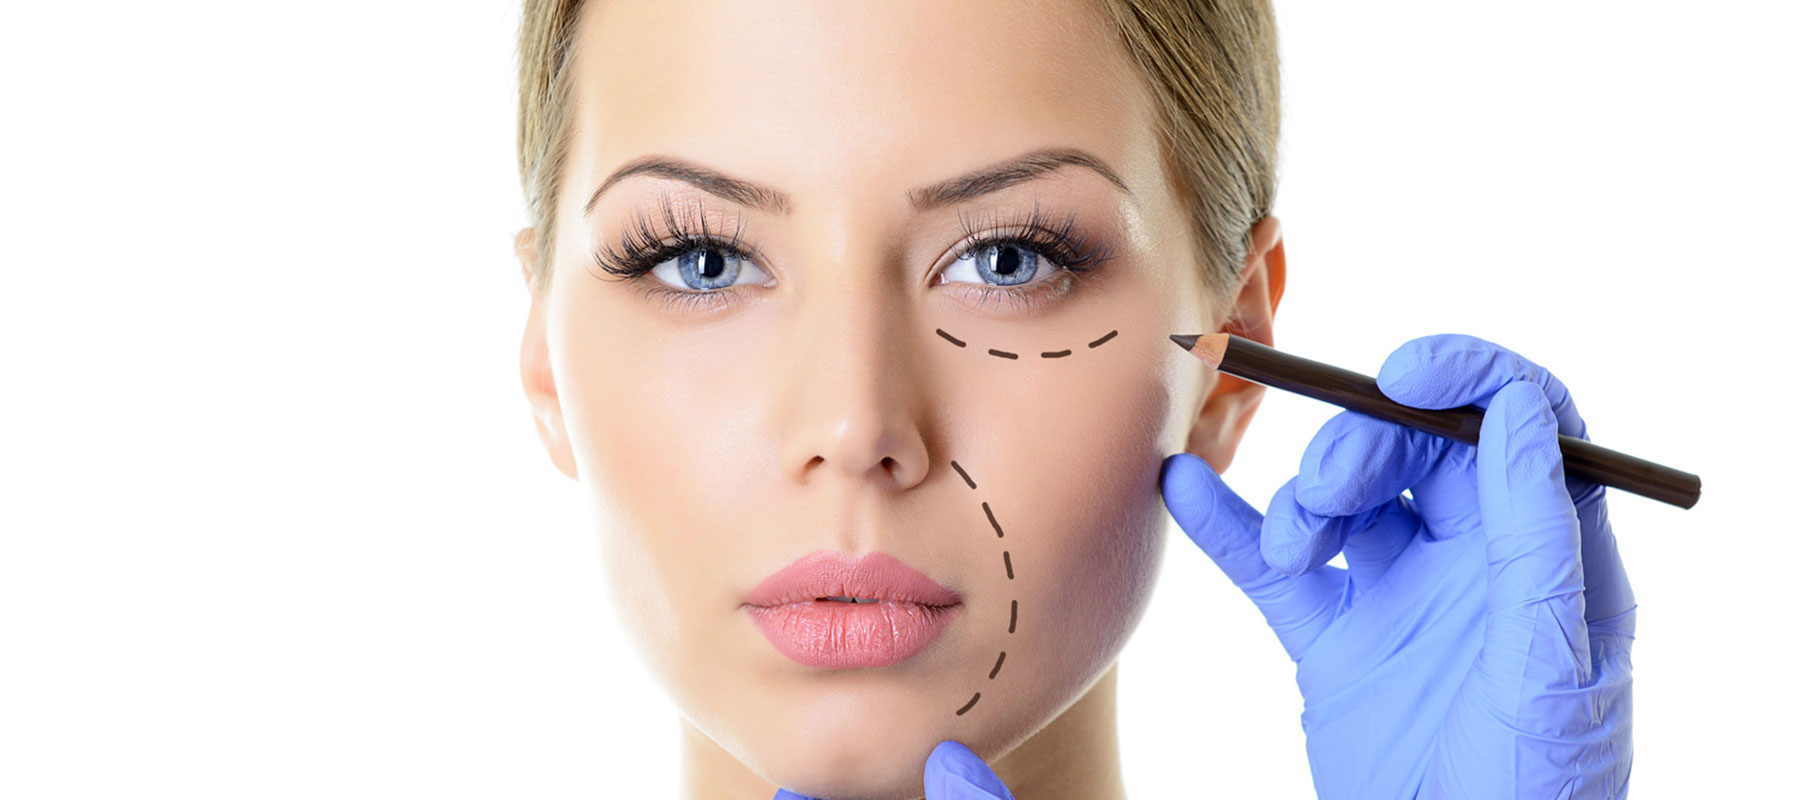 Woman's face is lined up for medical aesthetics operation